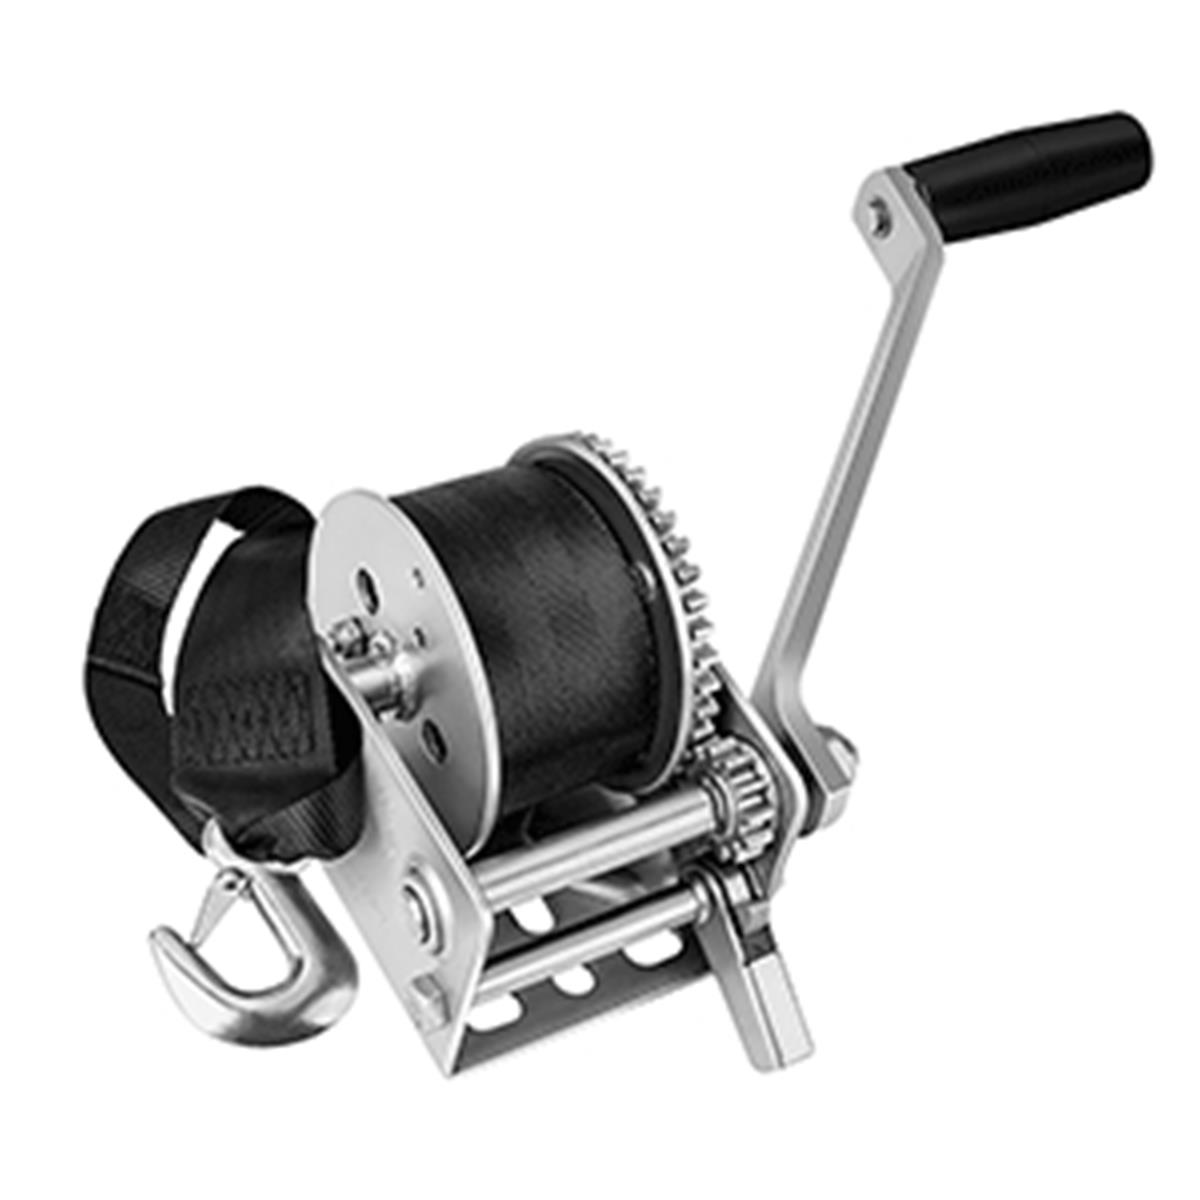 BetterBrand 900 lbs Single Speed Winch with 12 Strap for Personal Watercraft